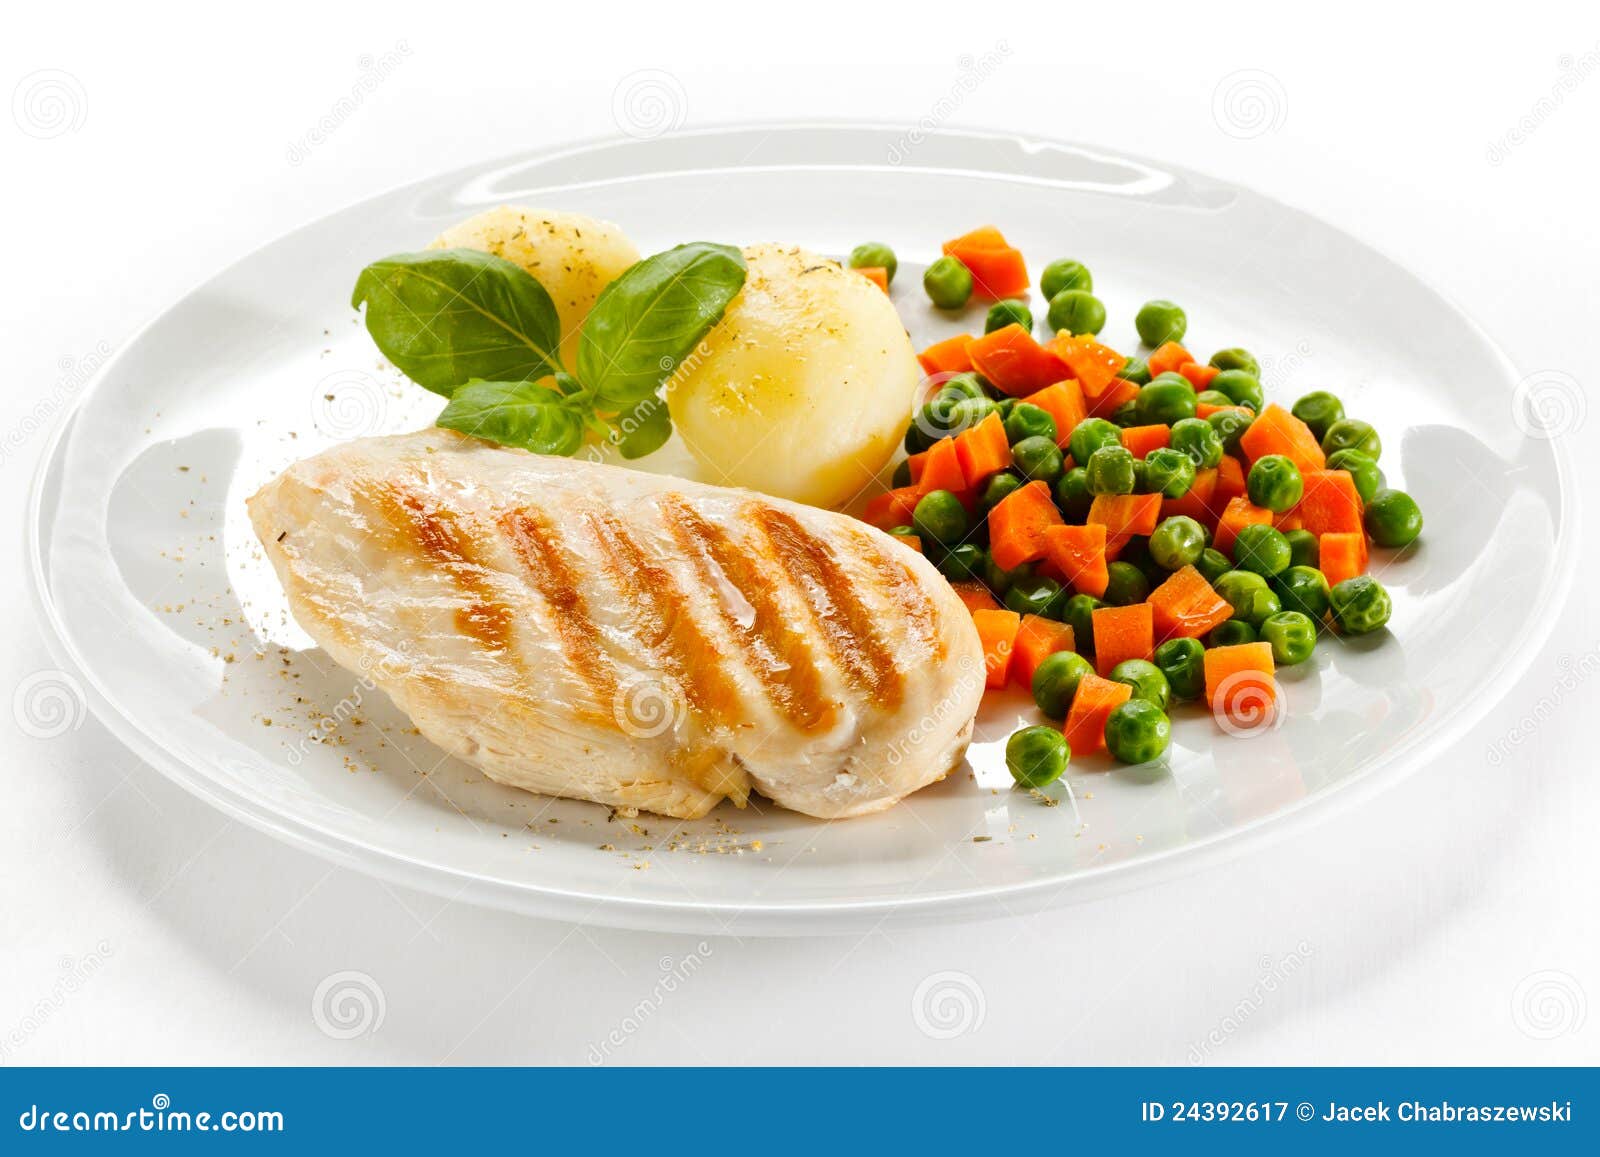 free clipart chicken breasts - photo #8